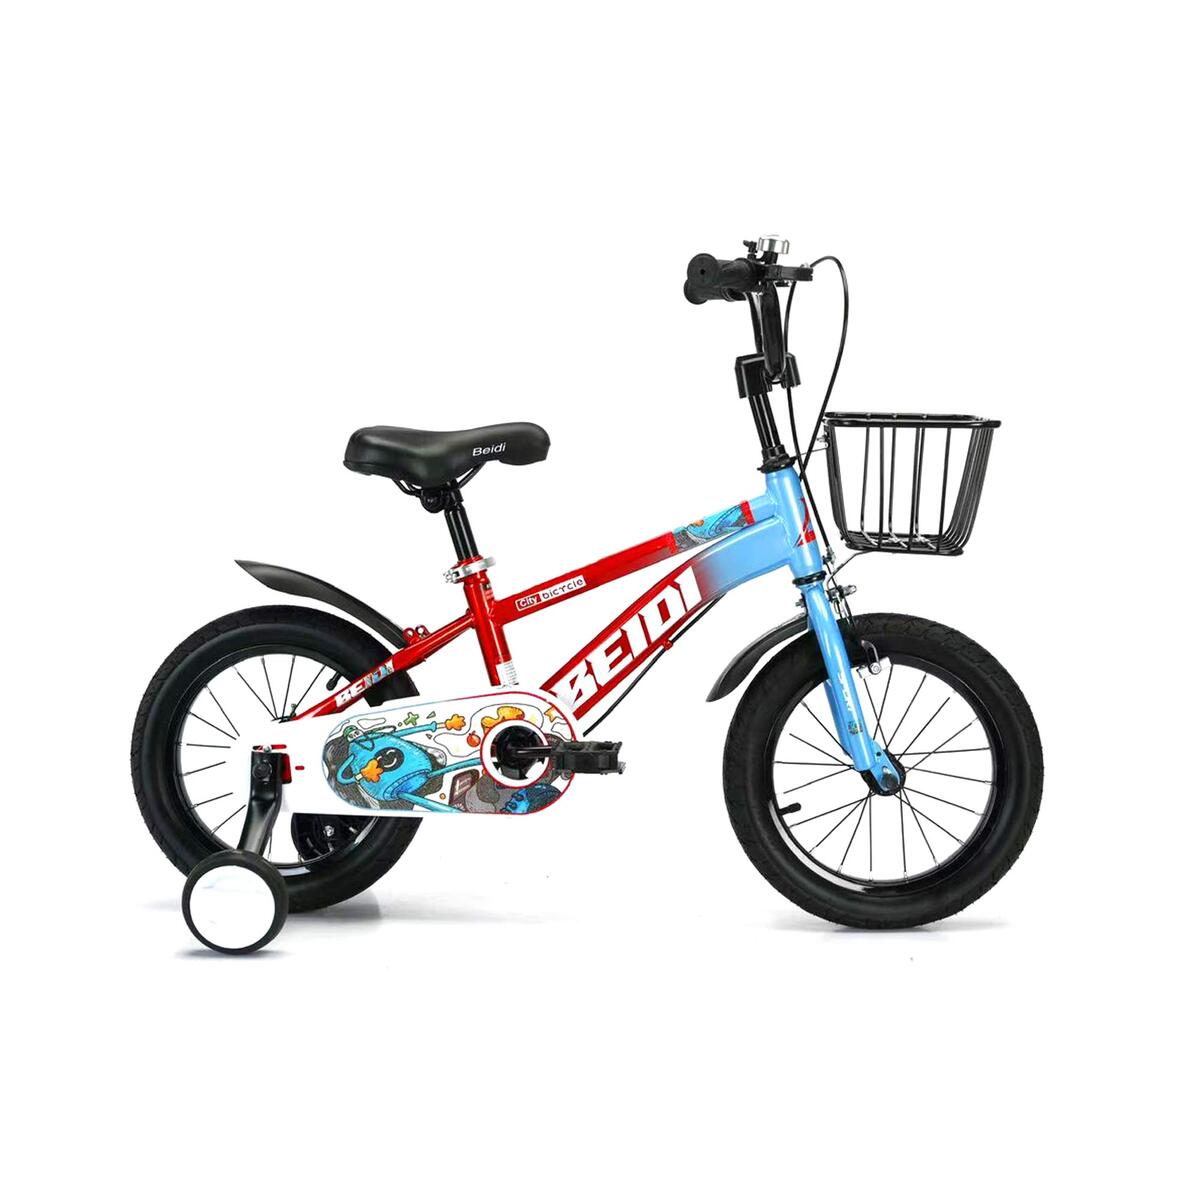 Skid Fusion Kids Bicycle 18 inch Assorted